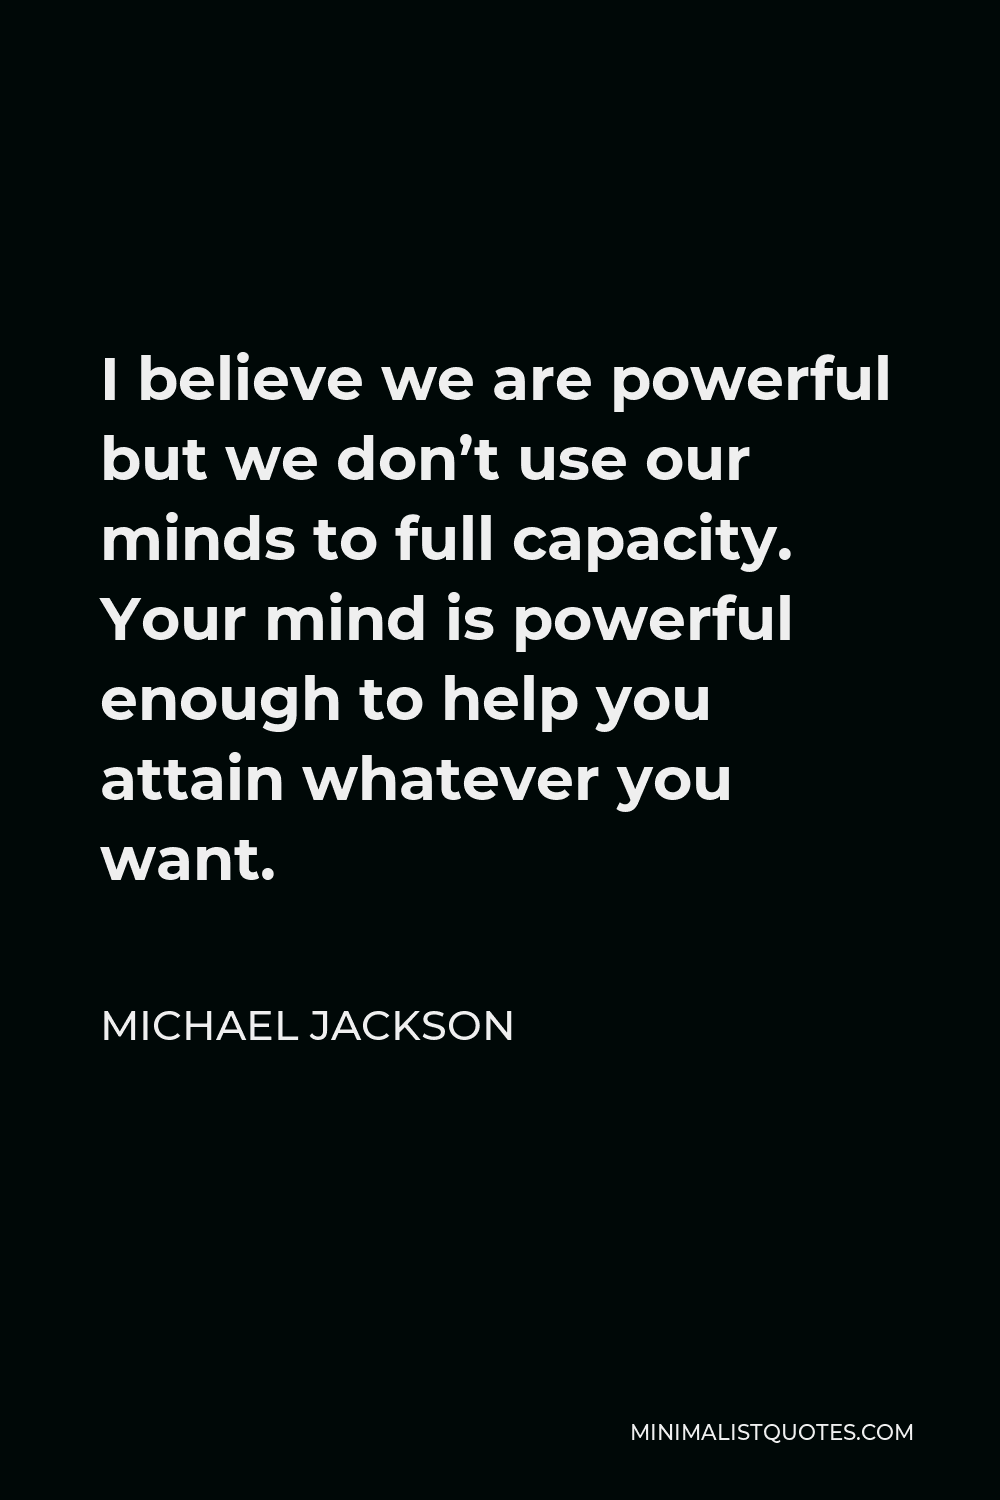 Michael Jackson Quote - I believe we are powerful but we don’t use our minds to full capacity. Your mind is powerful enough to help you attain whatever you want.